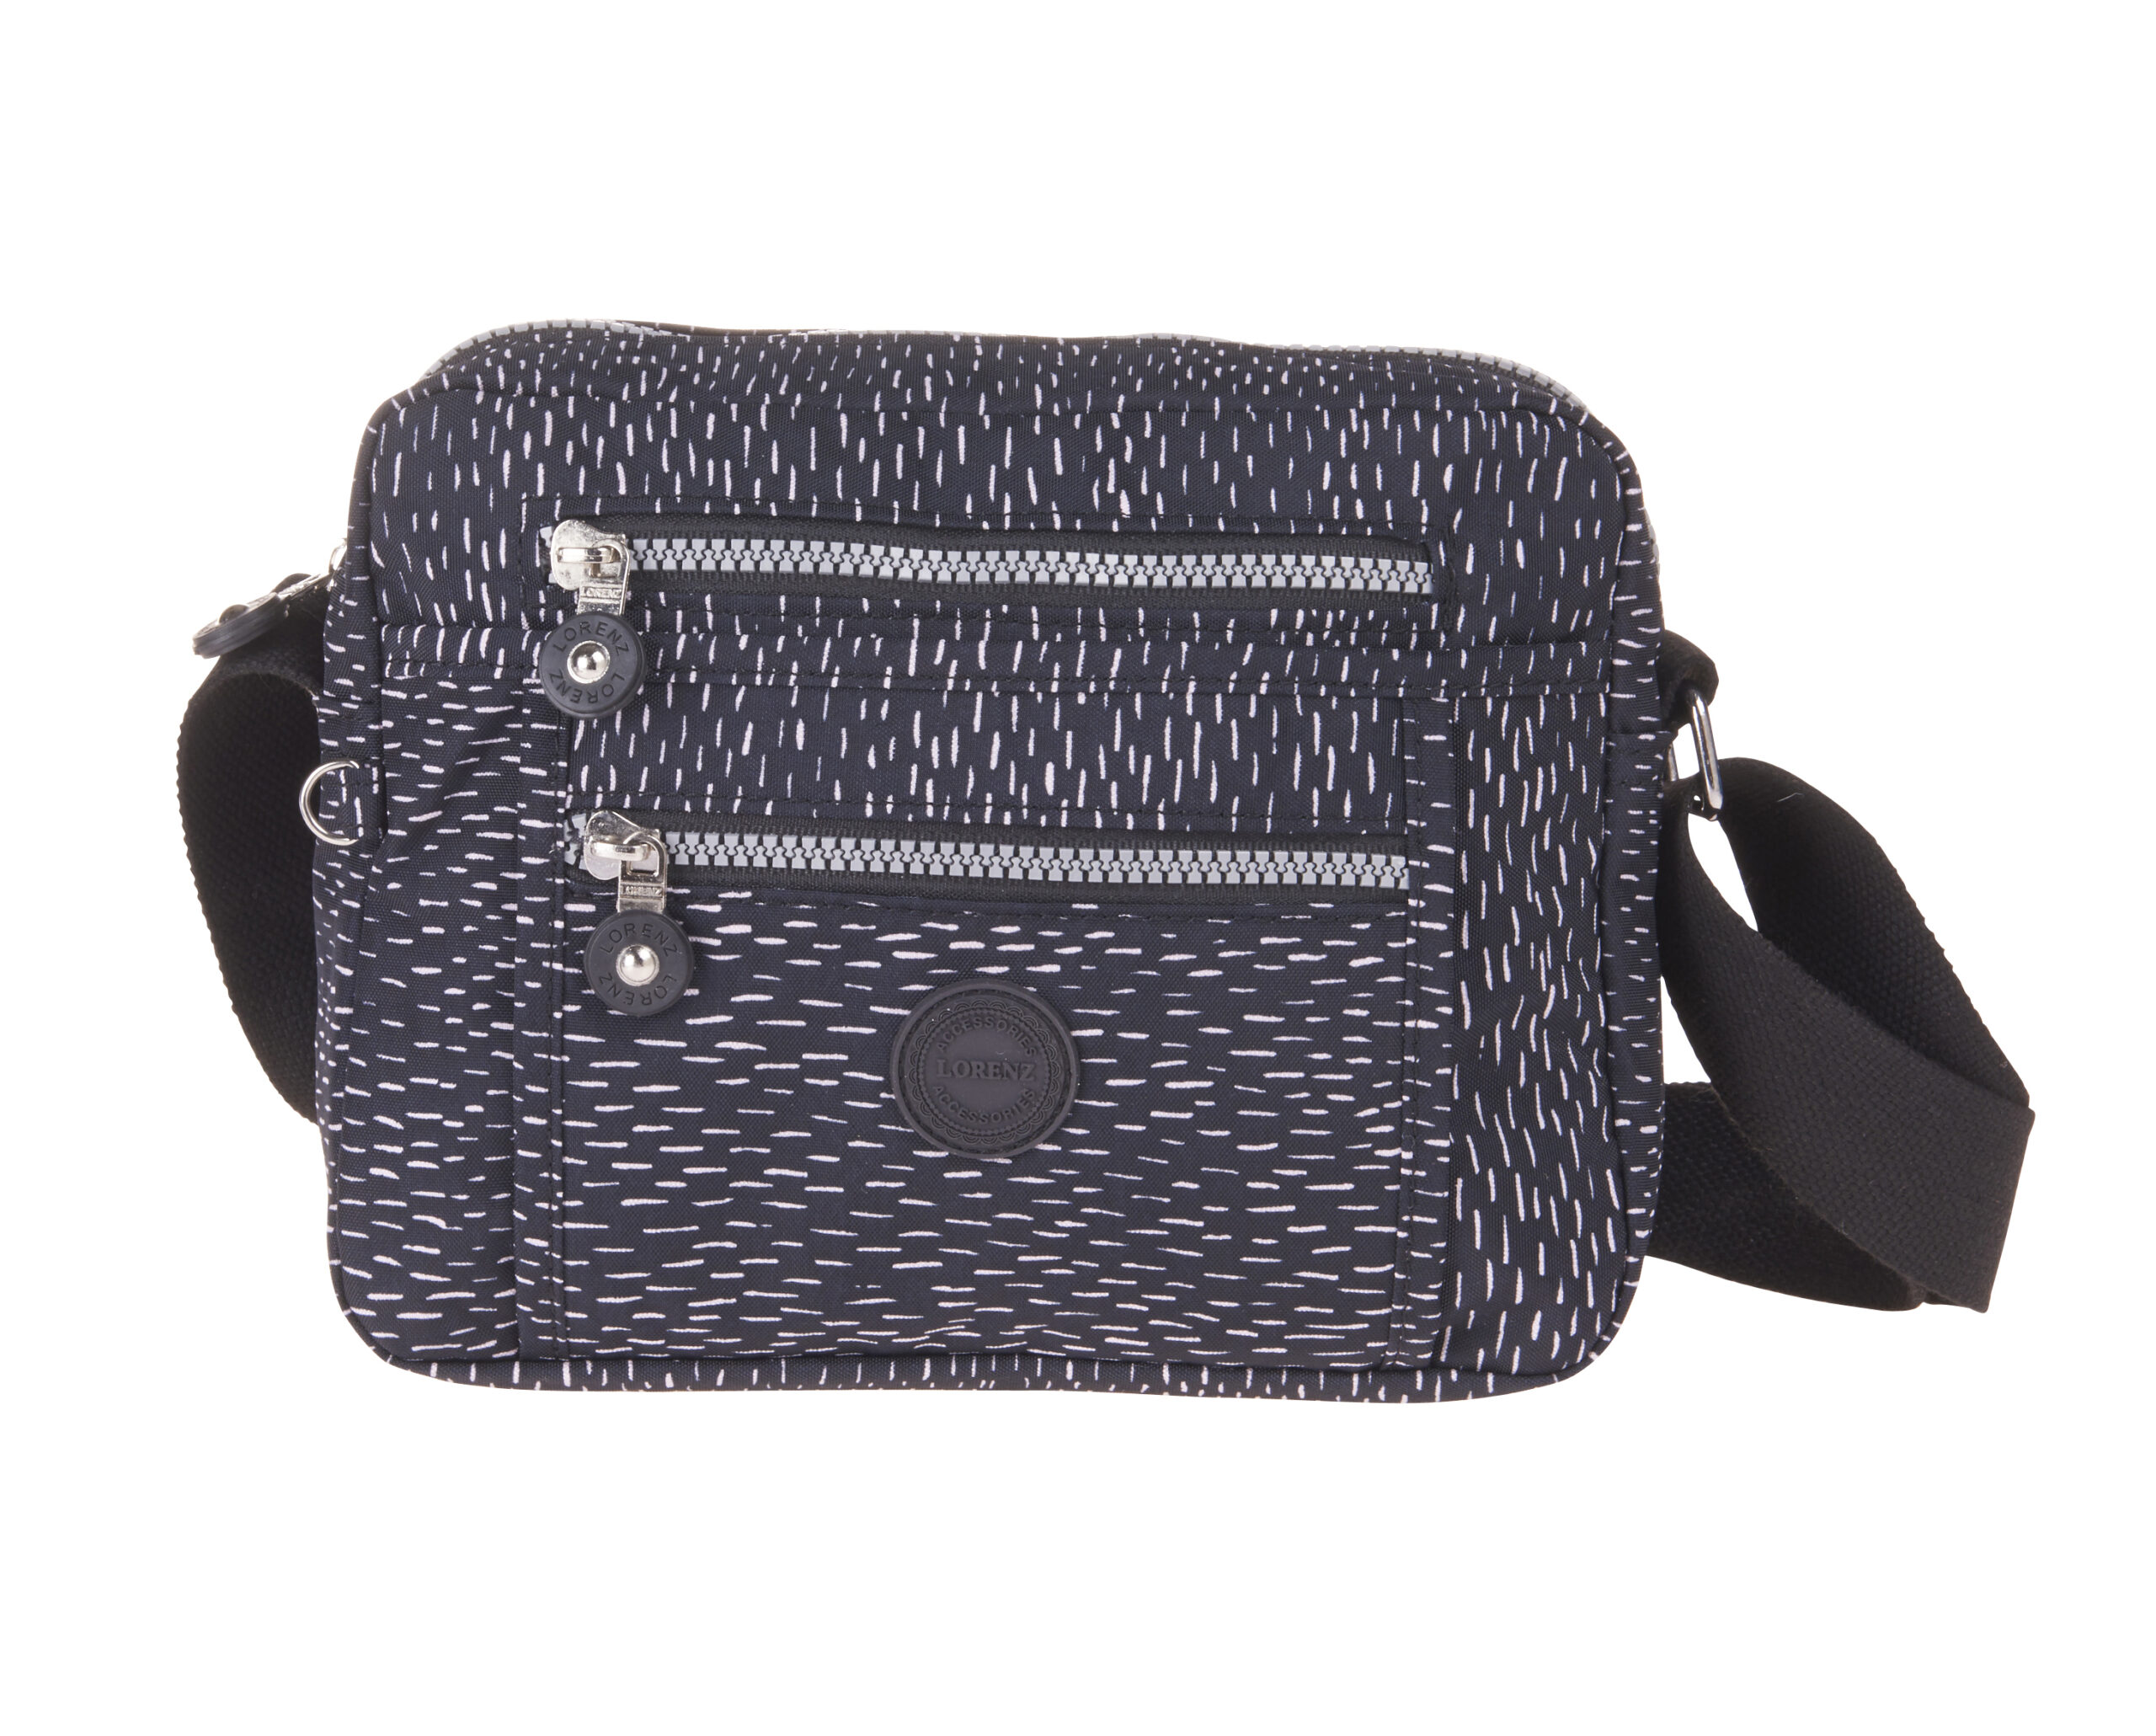 Top zip cross body bag with 2 front zips and a front velcro pocket - G ...